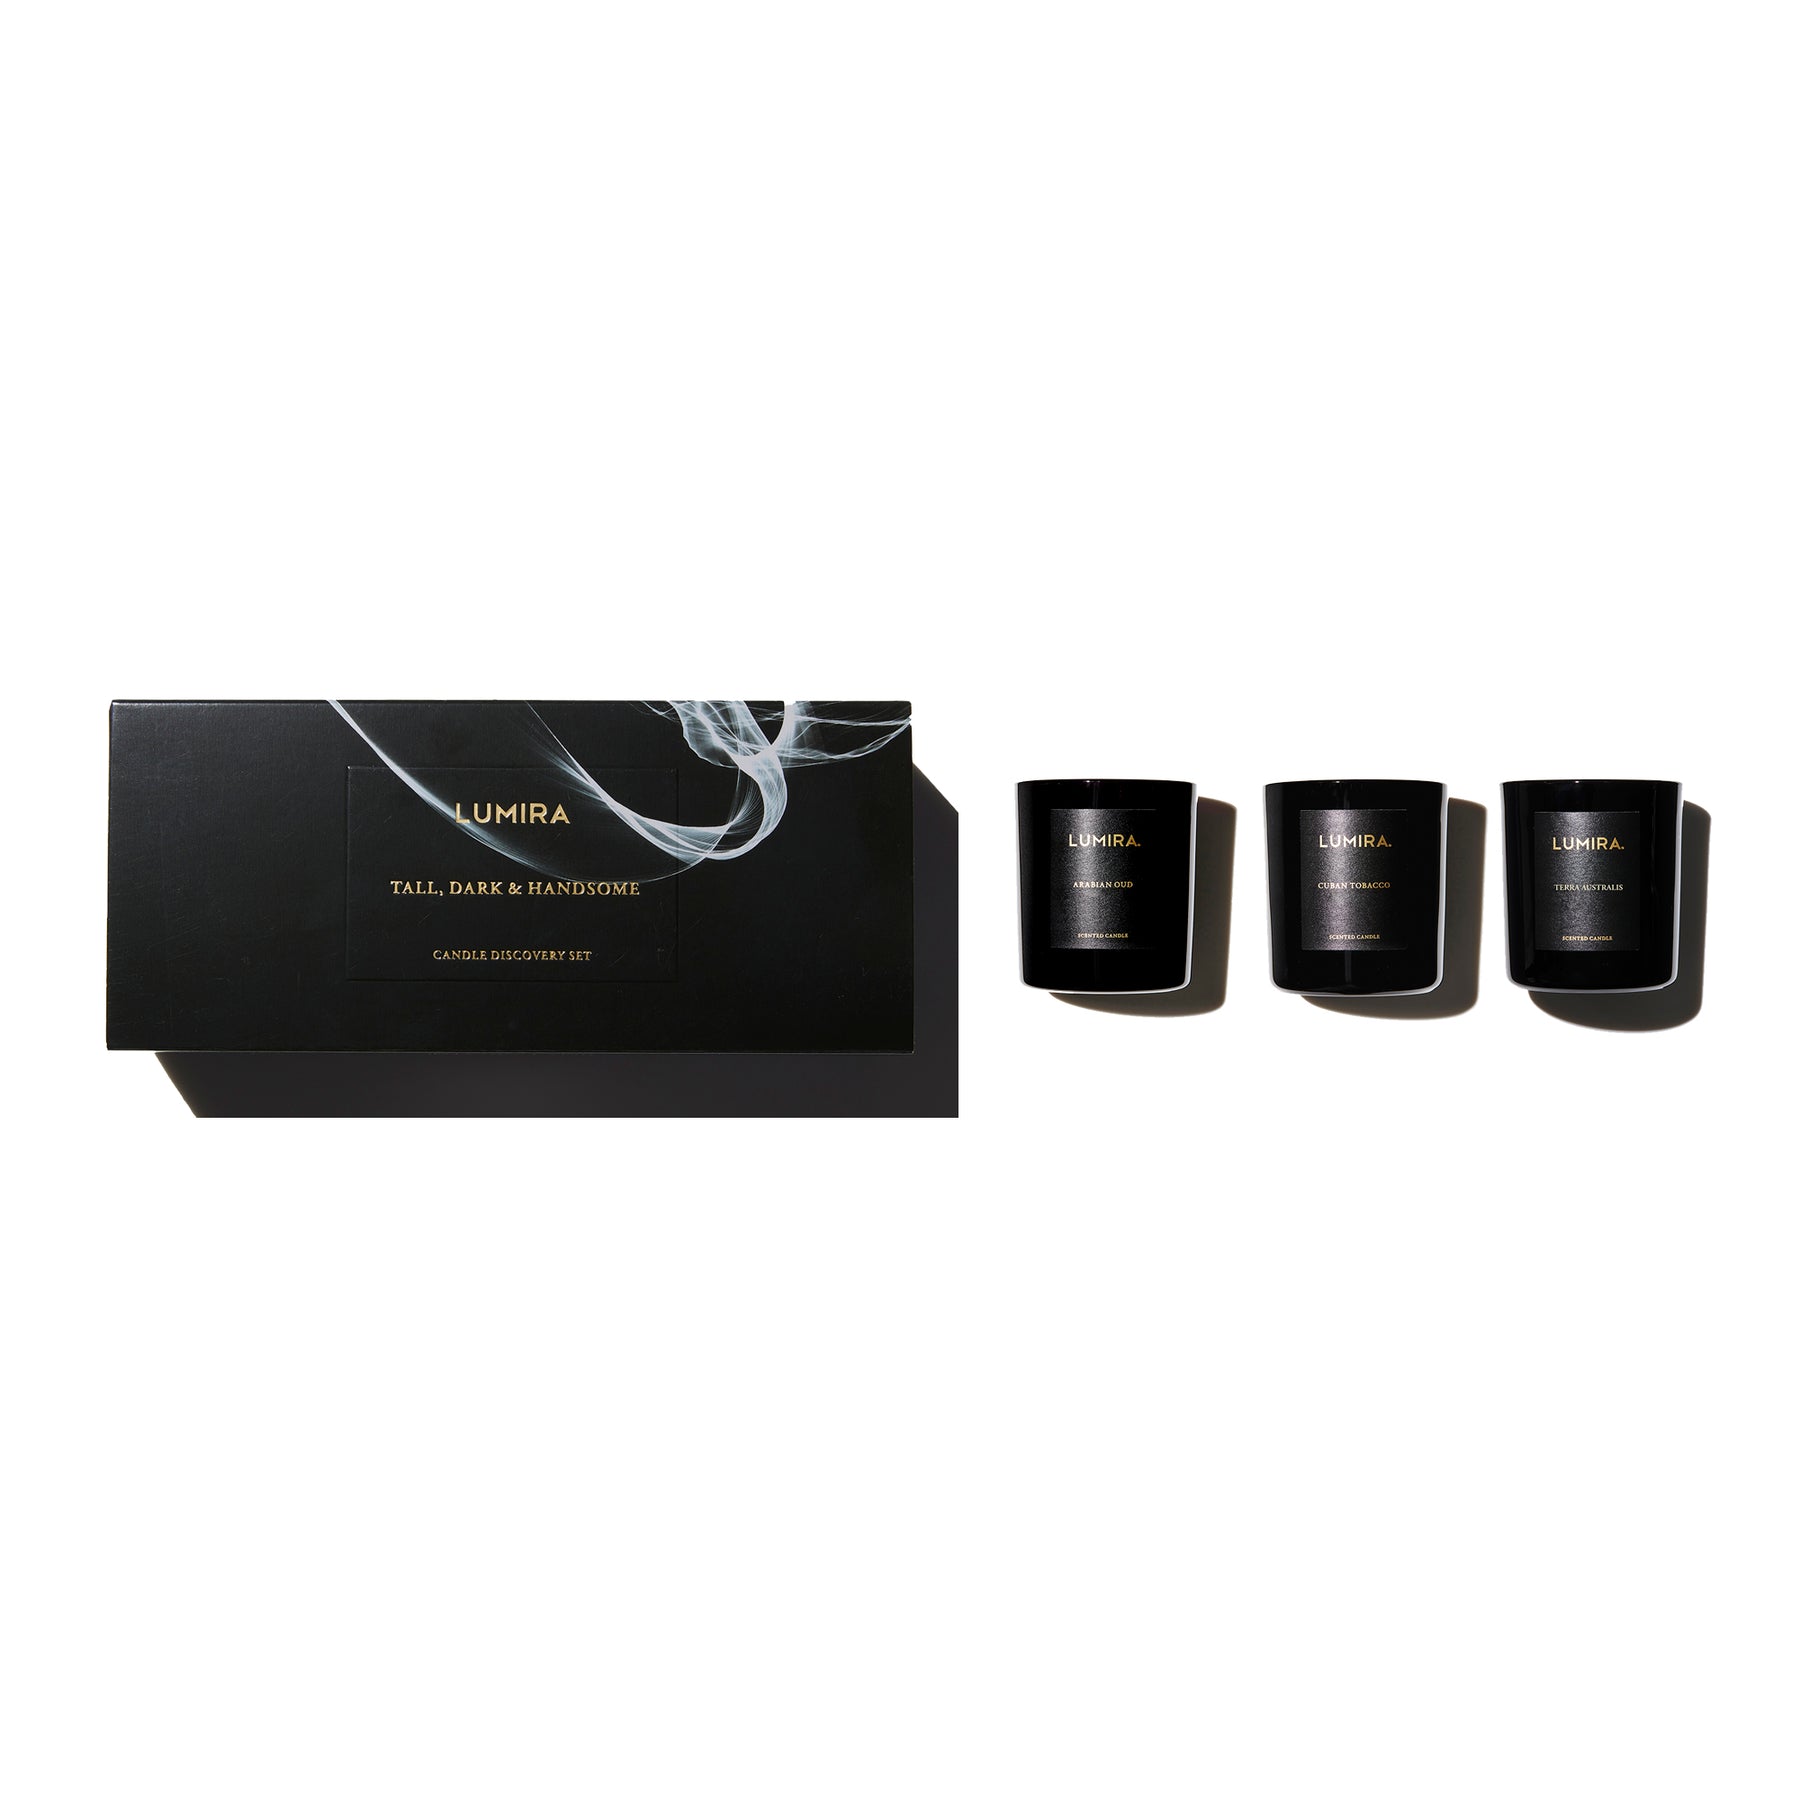 Tall, Dark & Handsome Candle Discovery Set